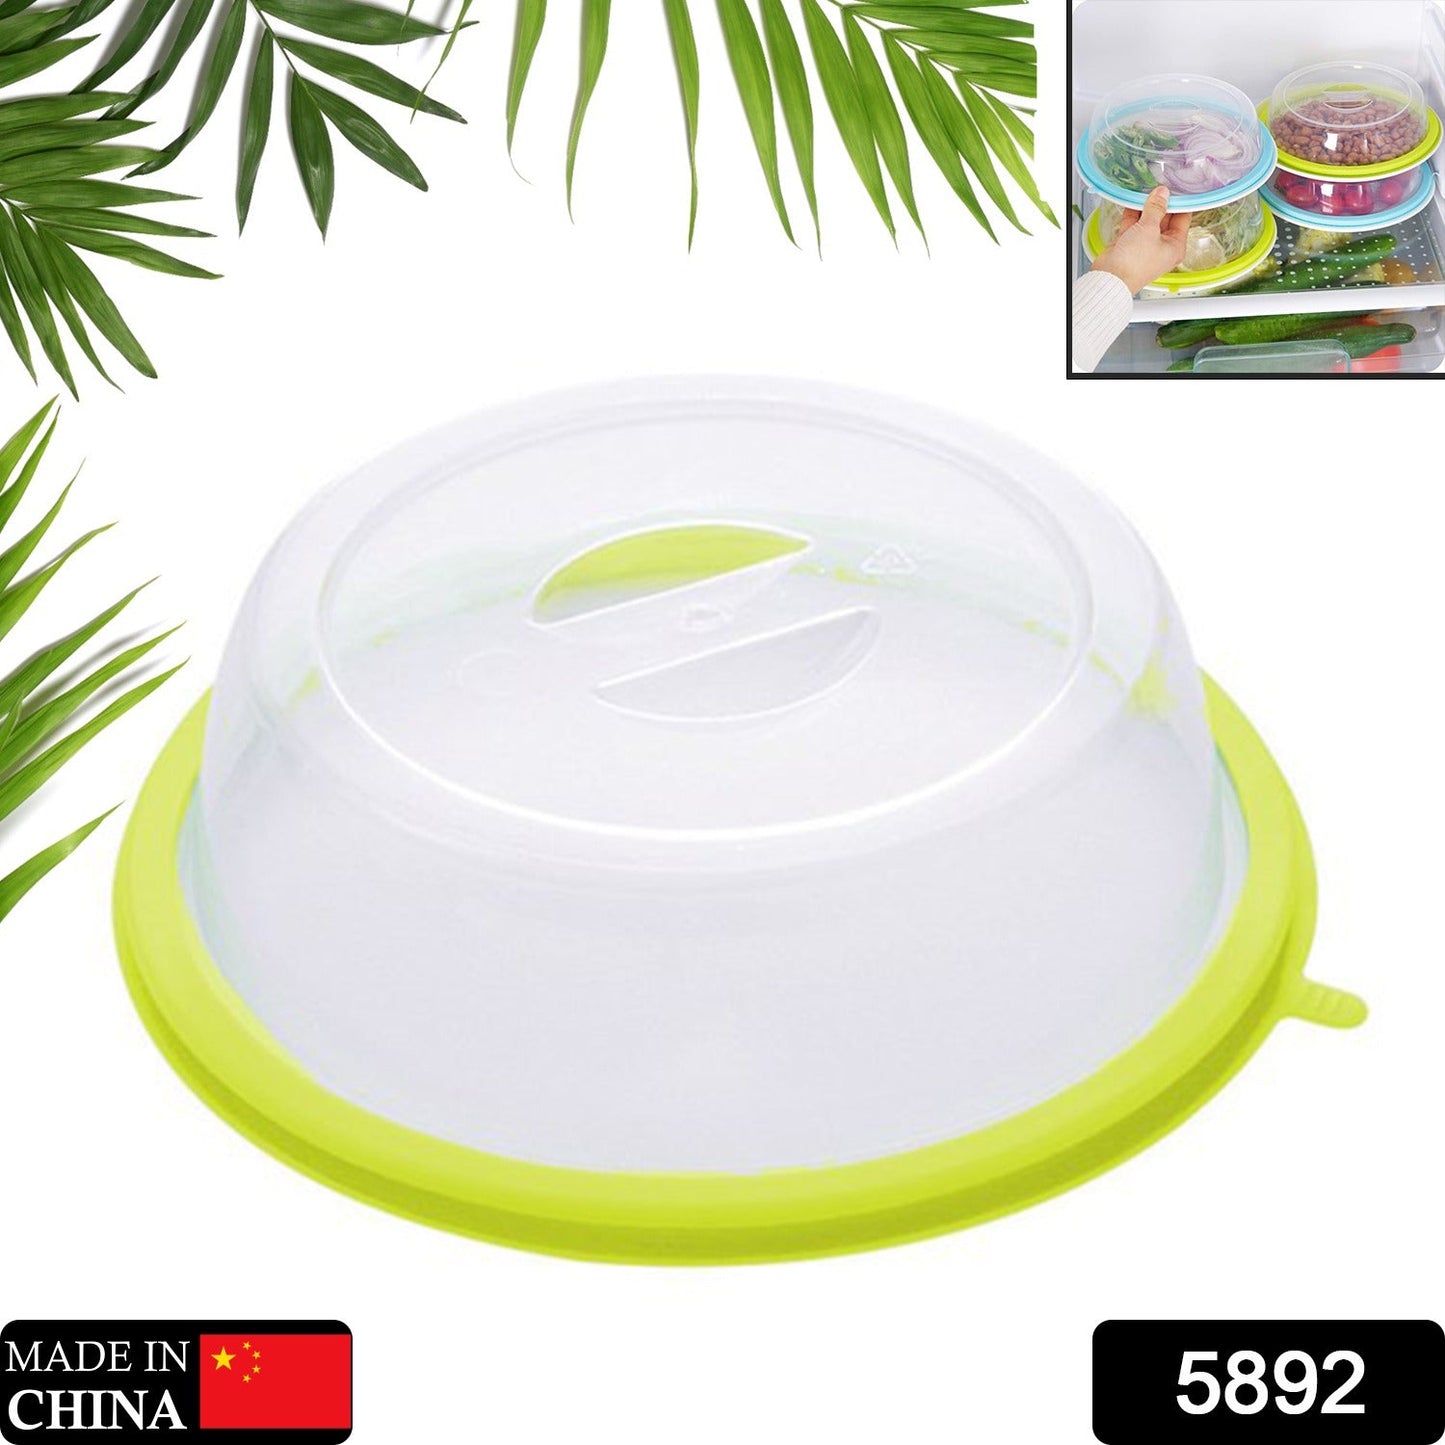 Air-Tight Microwave Oven Dish Cover Microwave Splatter Cover Food Cover Microwave Food Plate Kitchen Plate Dish Lid Dishwasher Safe